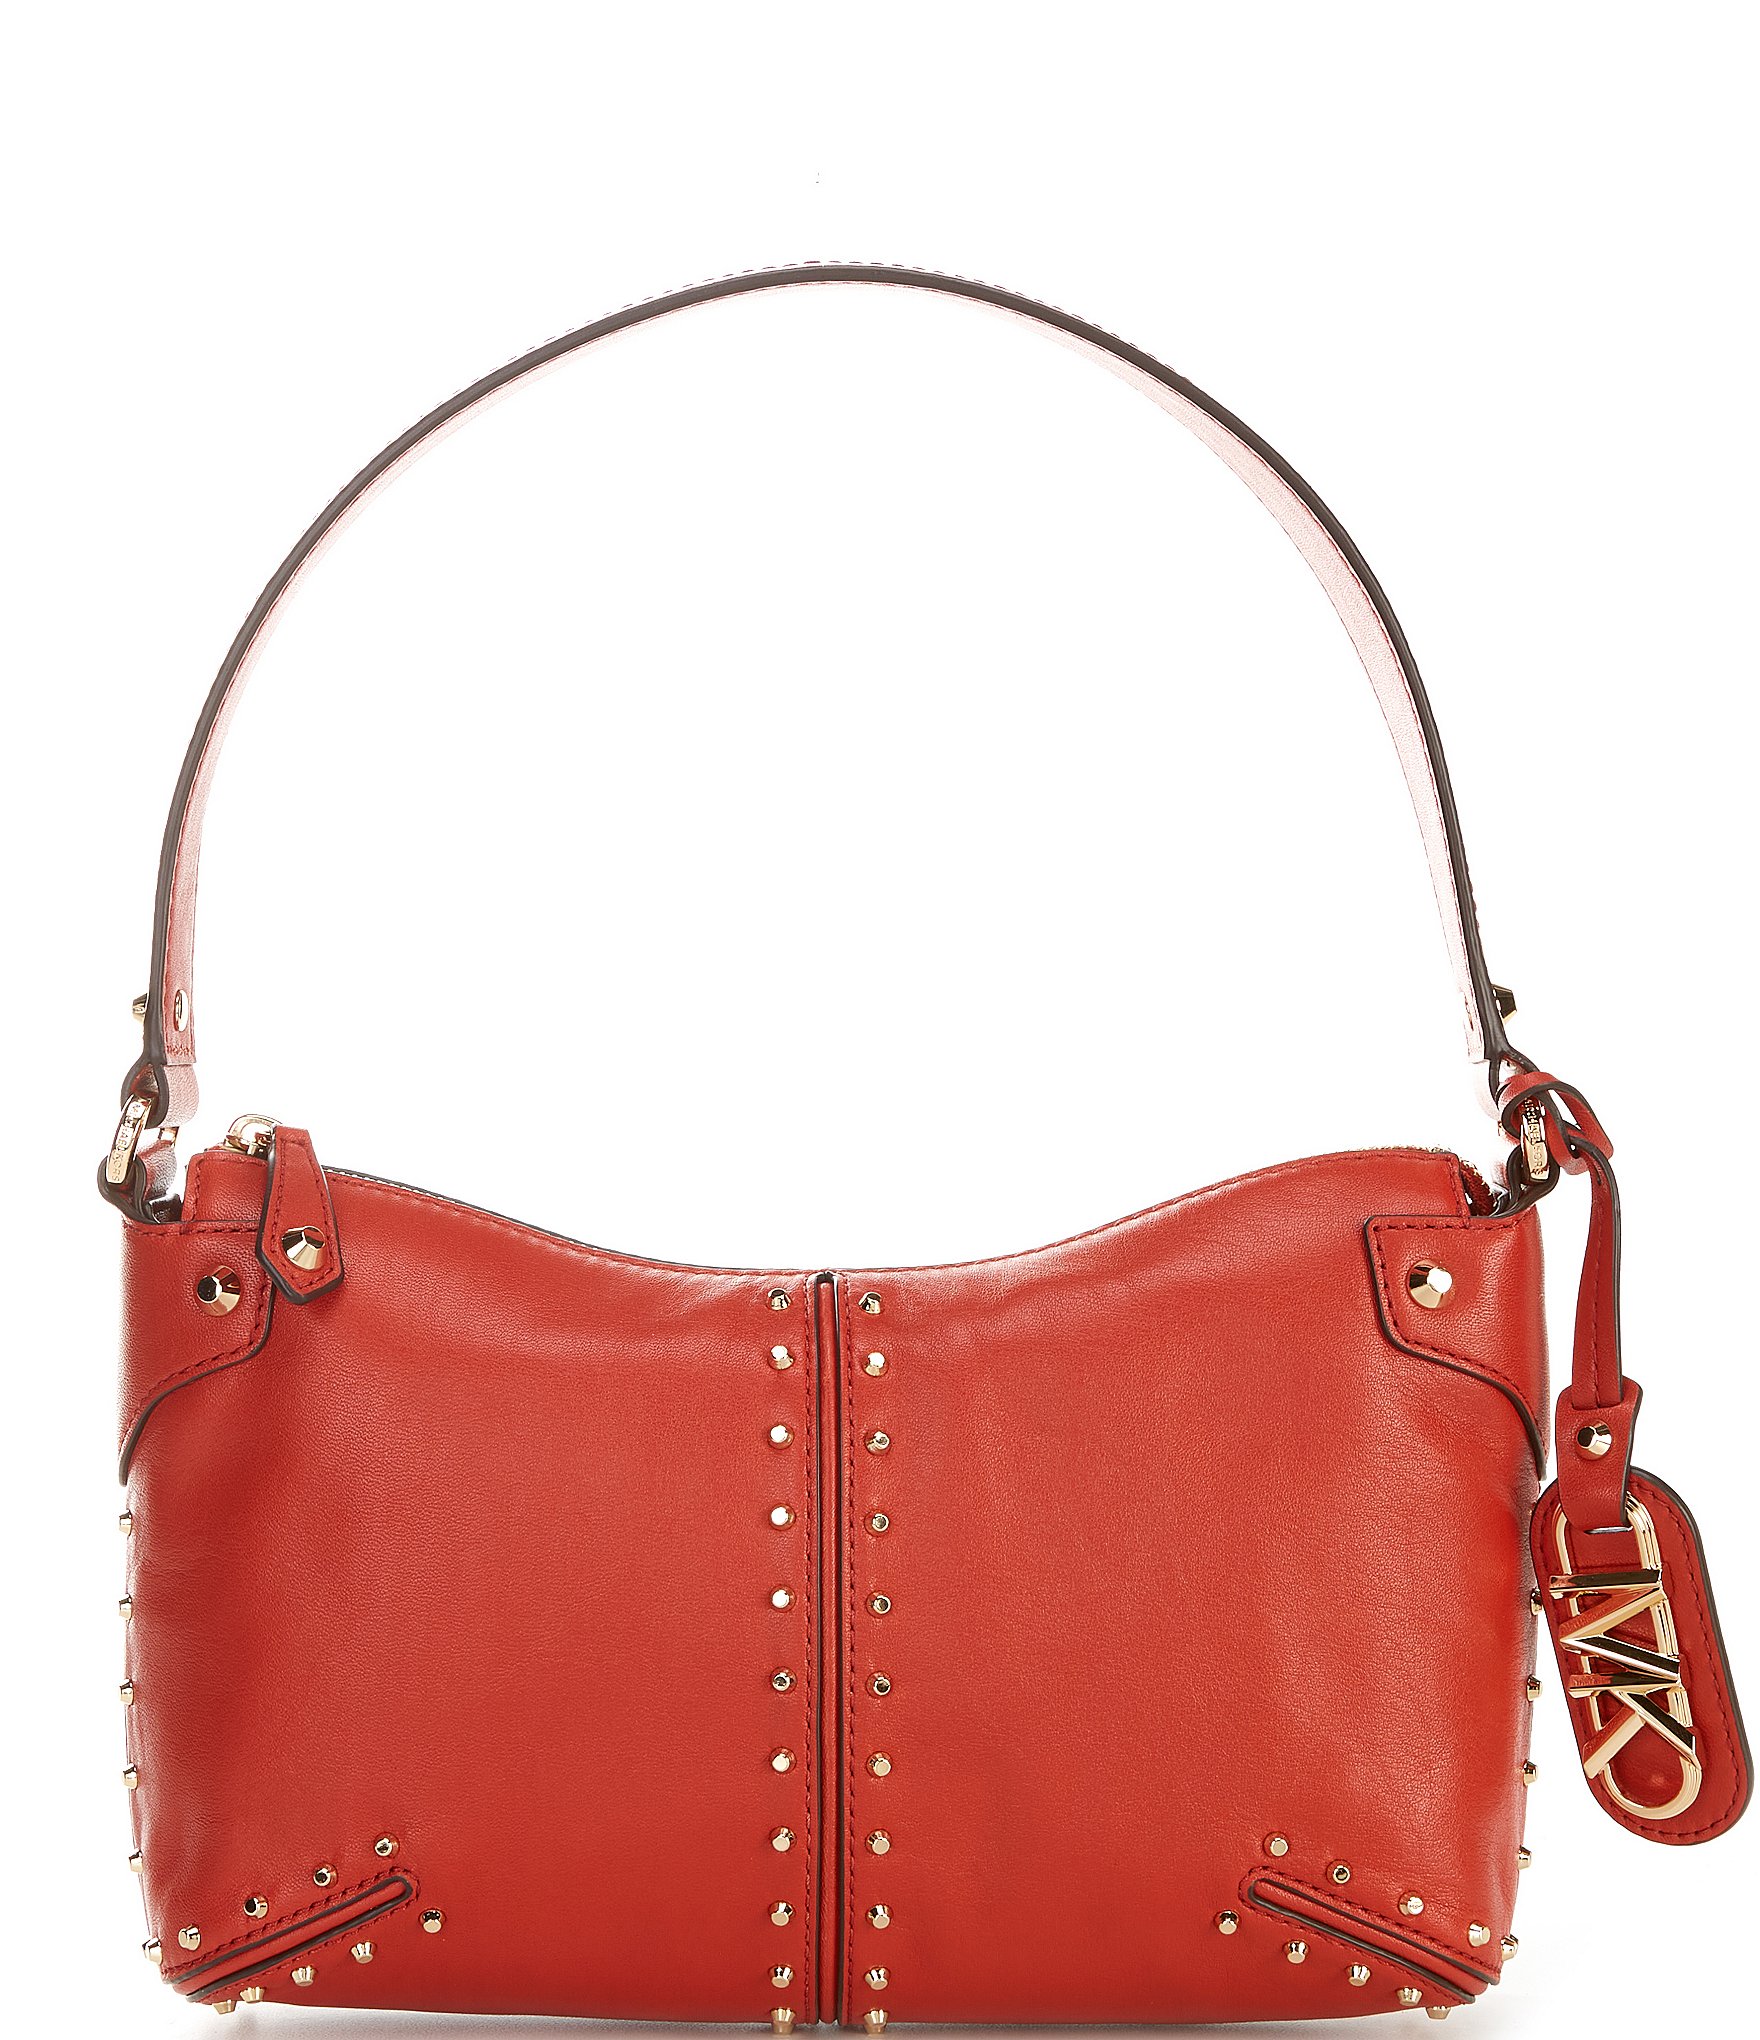 Up to 60% Off Michael Kors Bags at Macy's